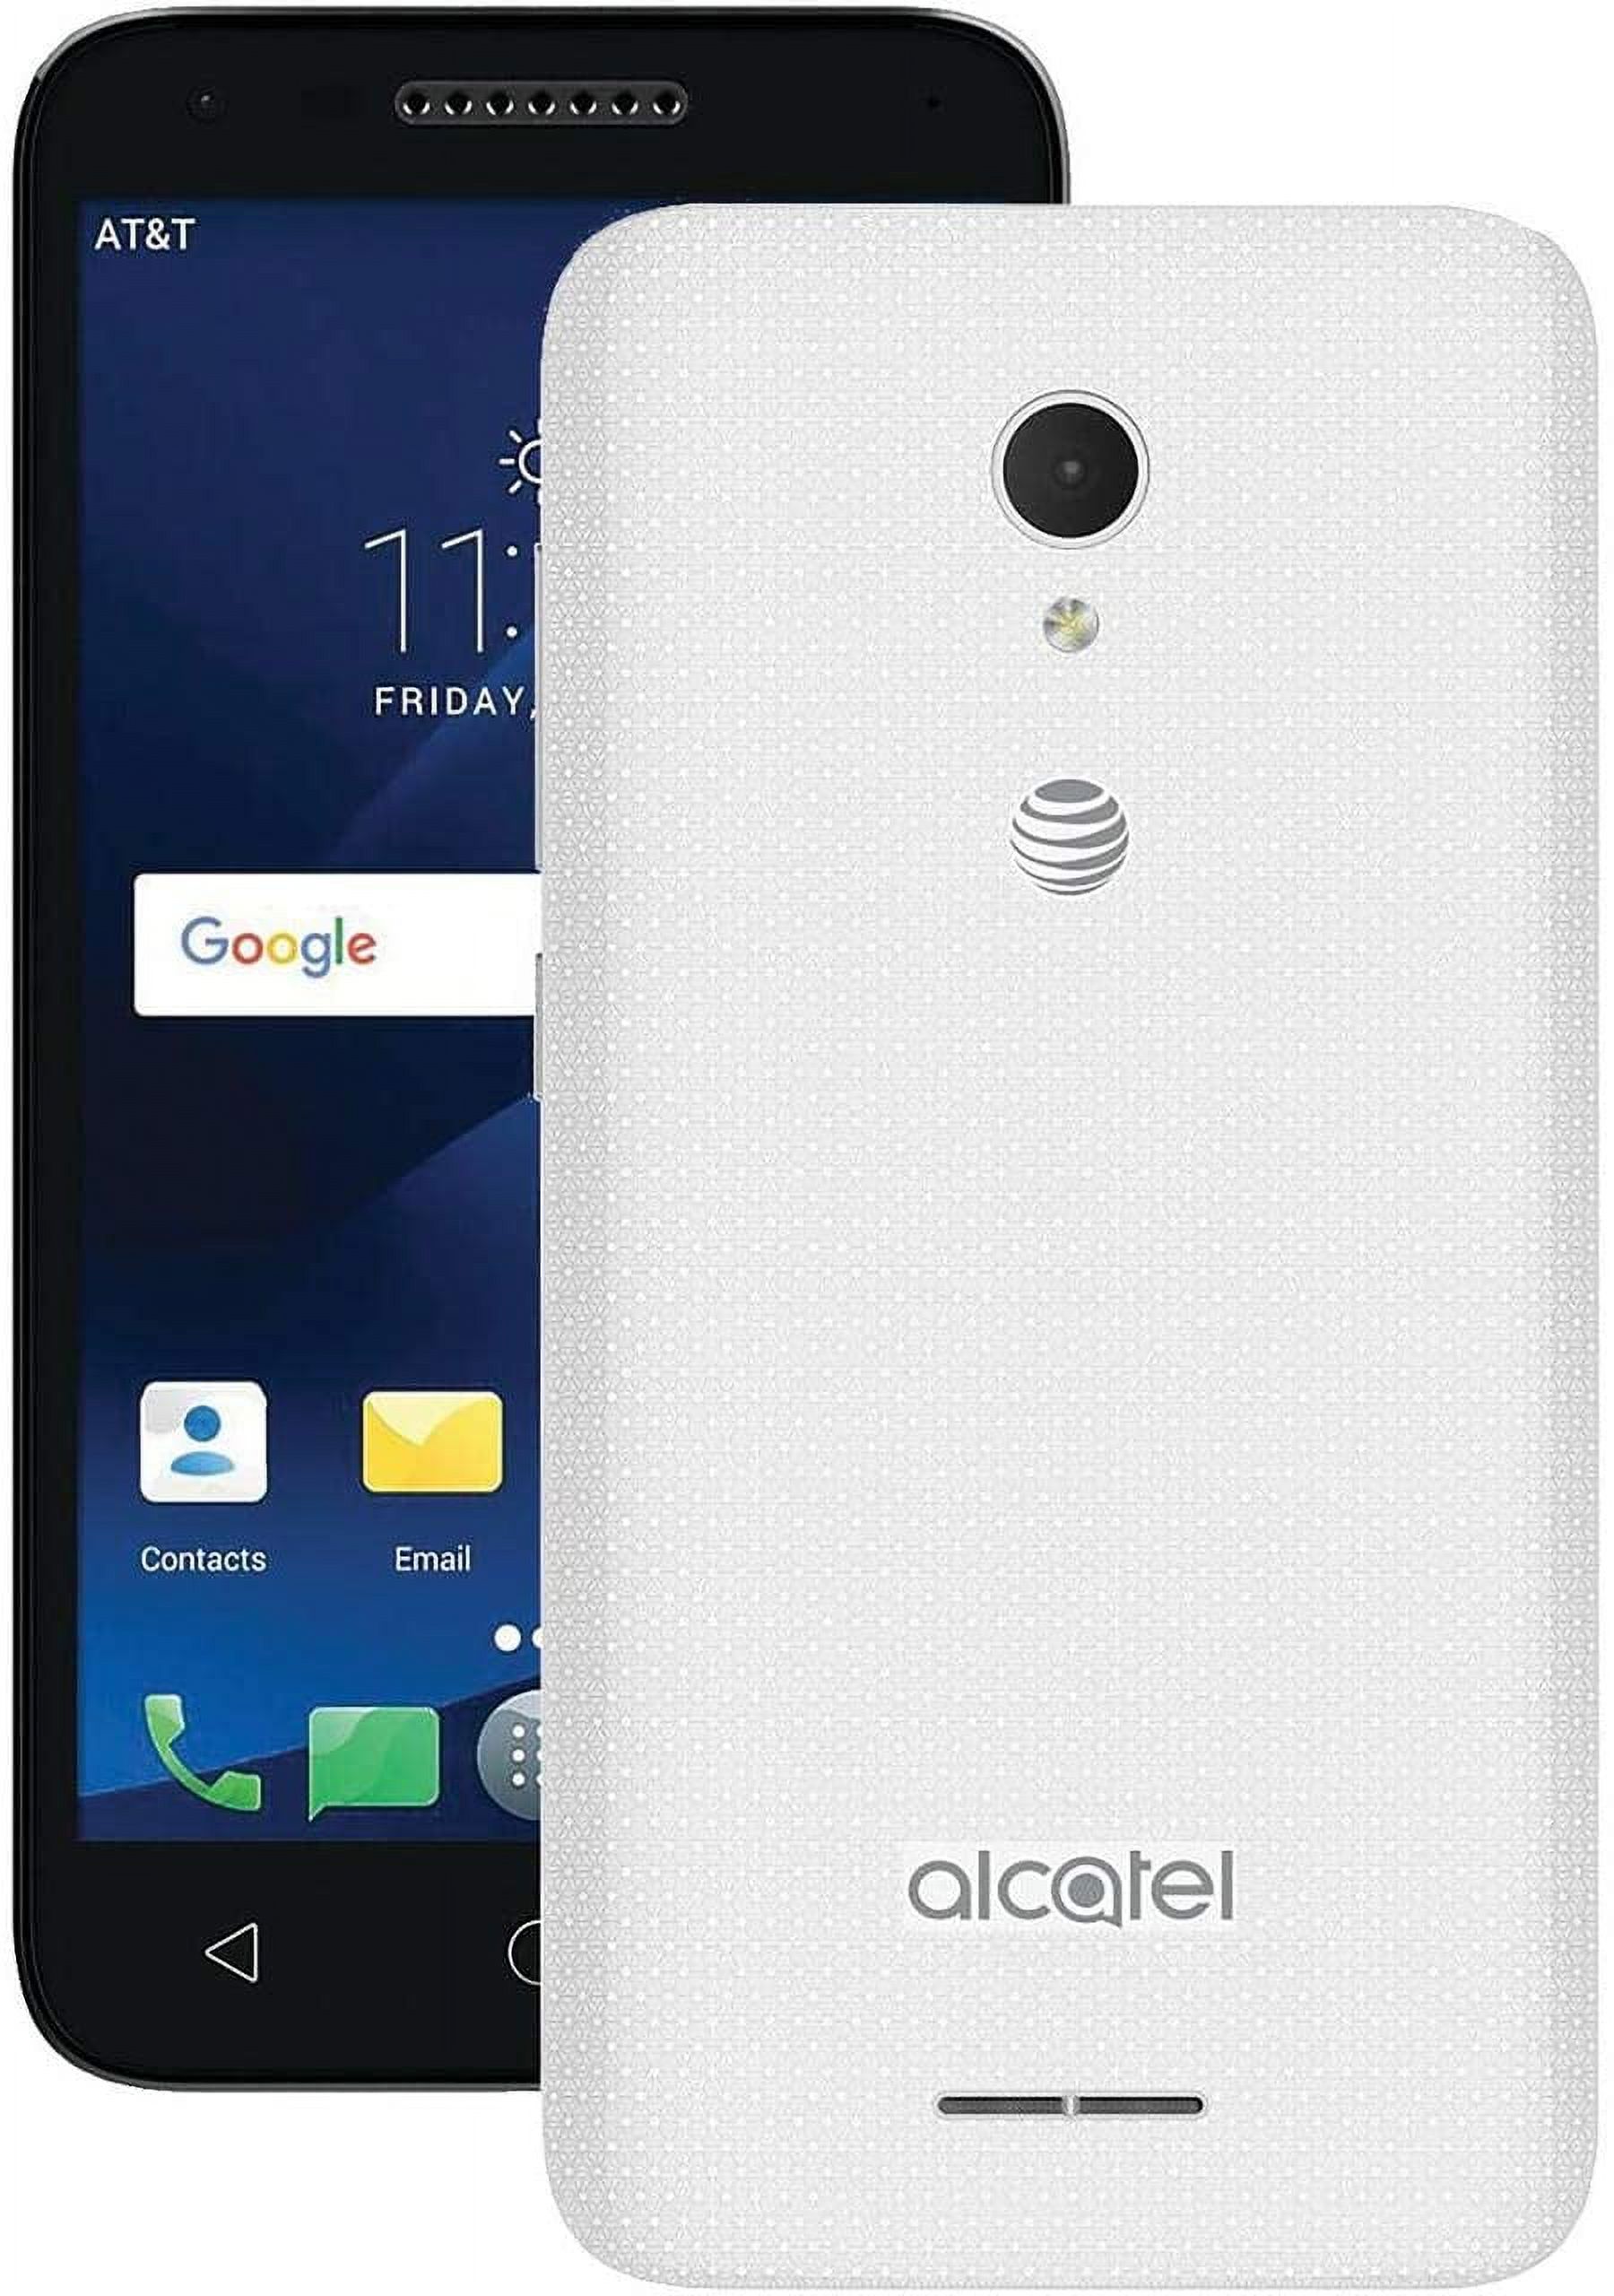 Alcatel - CAMEOX 4G LTE with 16GB Memory Cell Phone - Arctic White (AT&T) - image 1 of 8